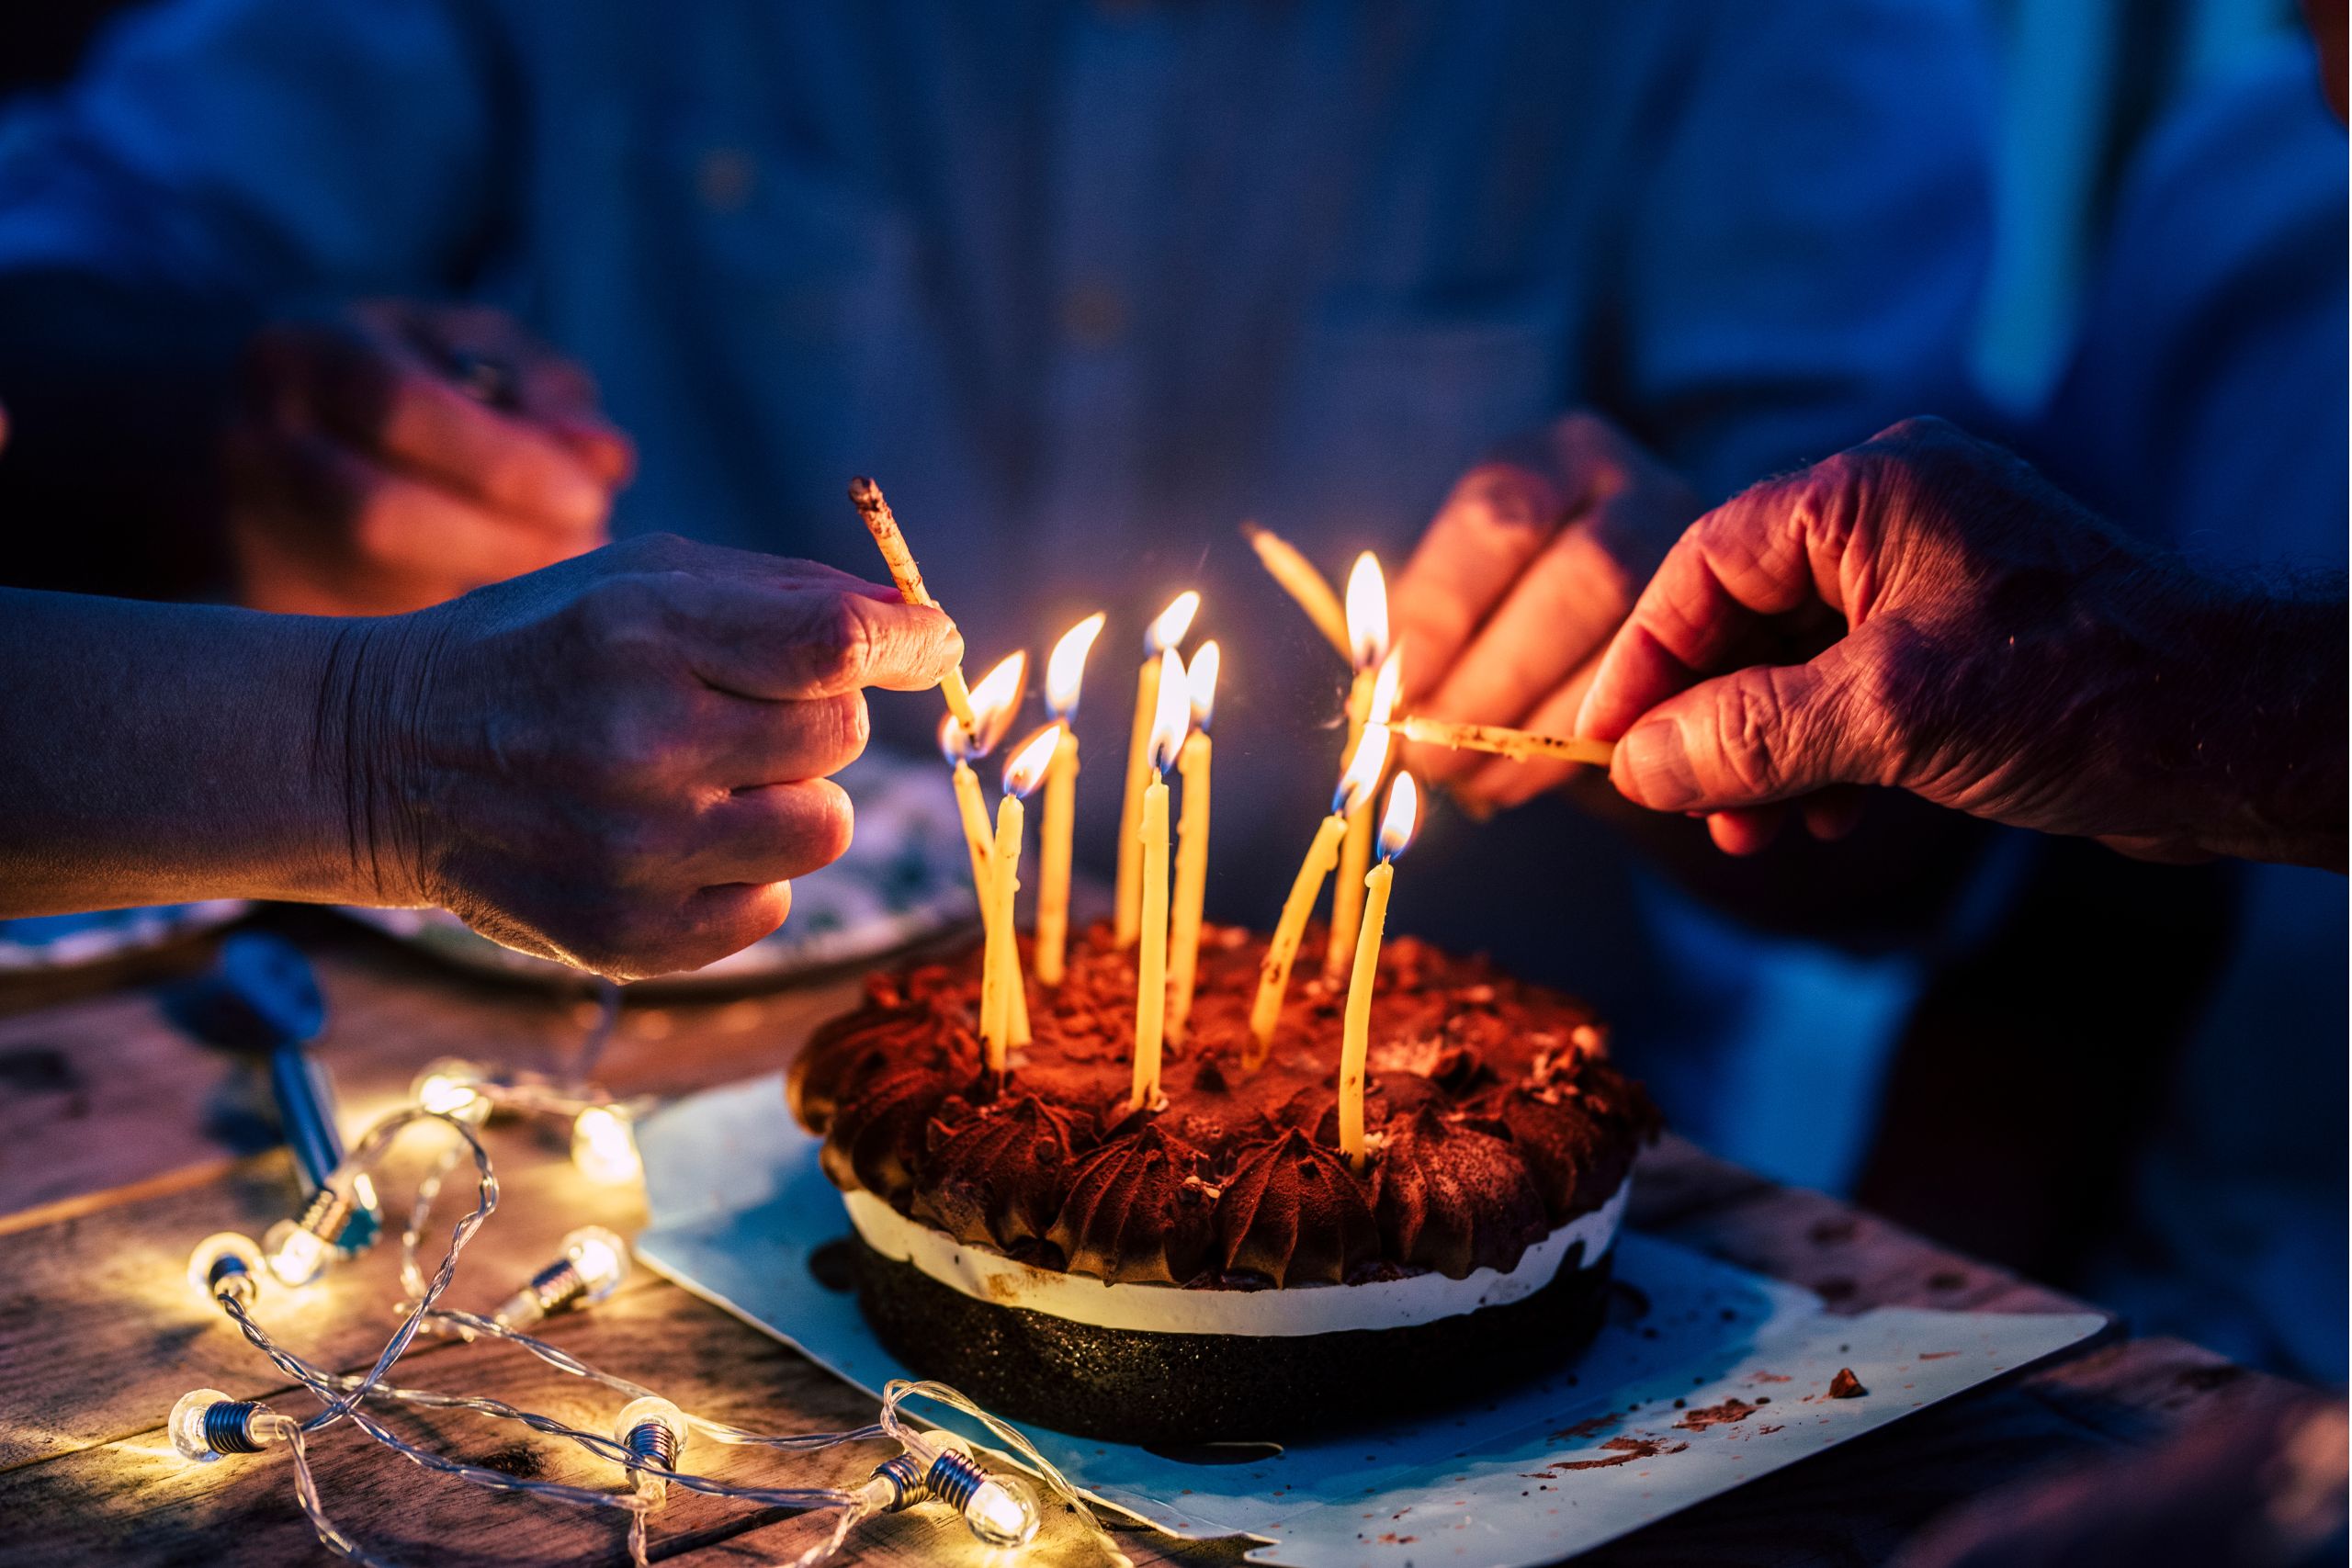 This is a photo of a birthday cake, with candles being lit. It is the header image of a page on the Urostomy Association's website which encourages readers to donate in celebration.